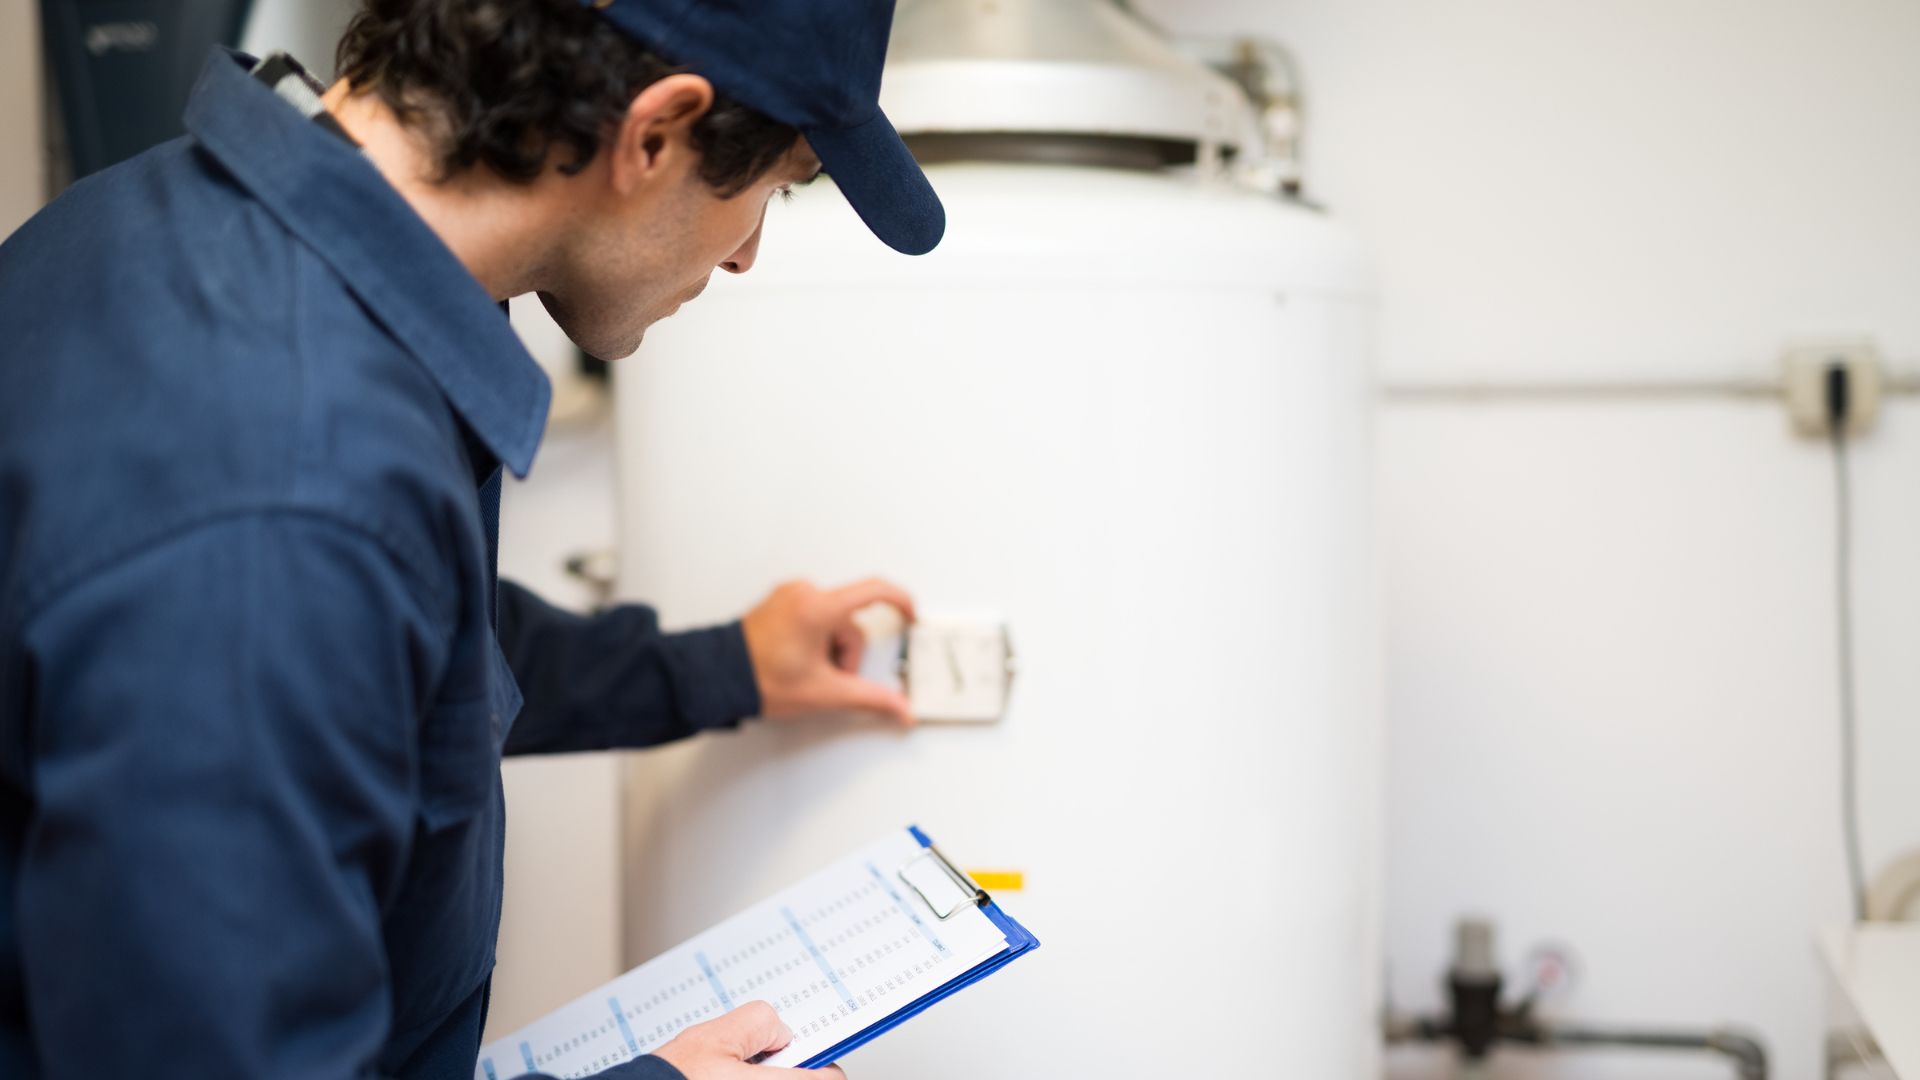 Get in touch with CAN Plumbing and Drainage for all your requirements regarding hot water heaters. Their expert plumbers are ready to assist you!